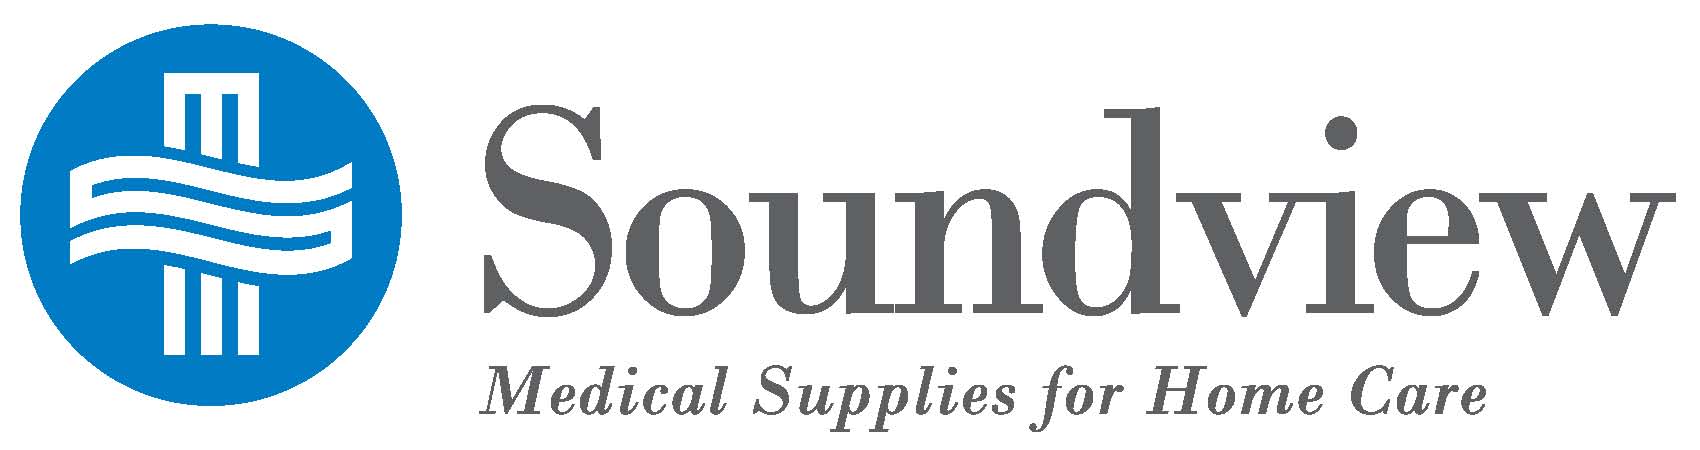 Soundview Medical Supply